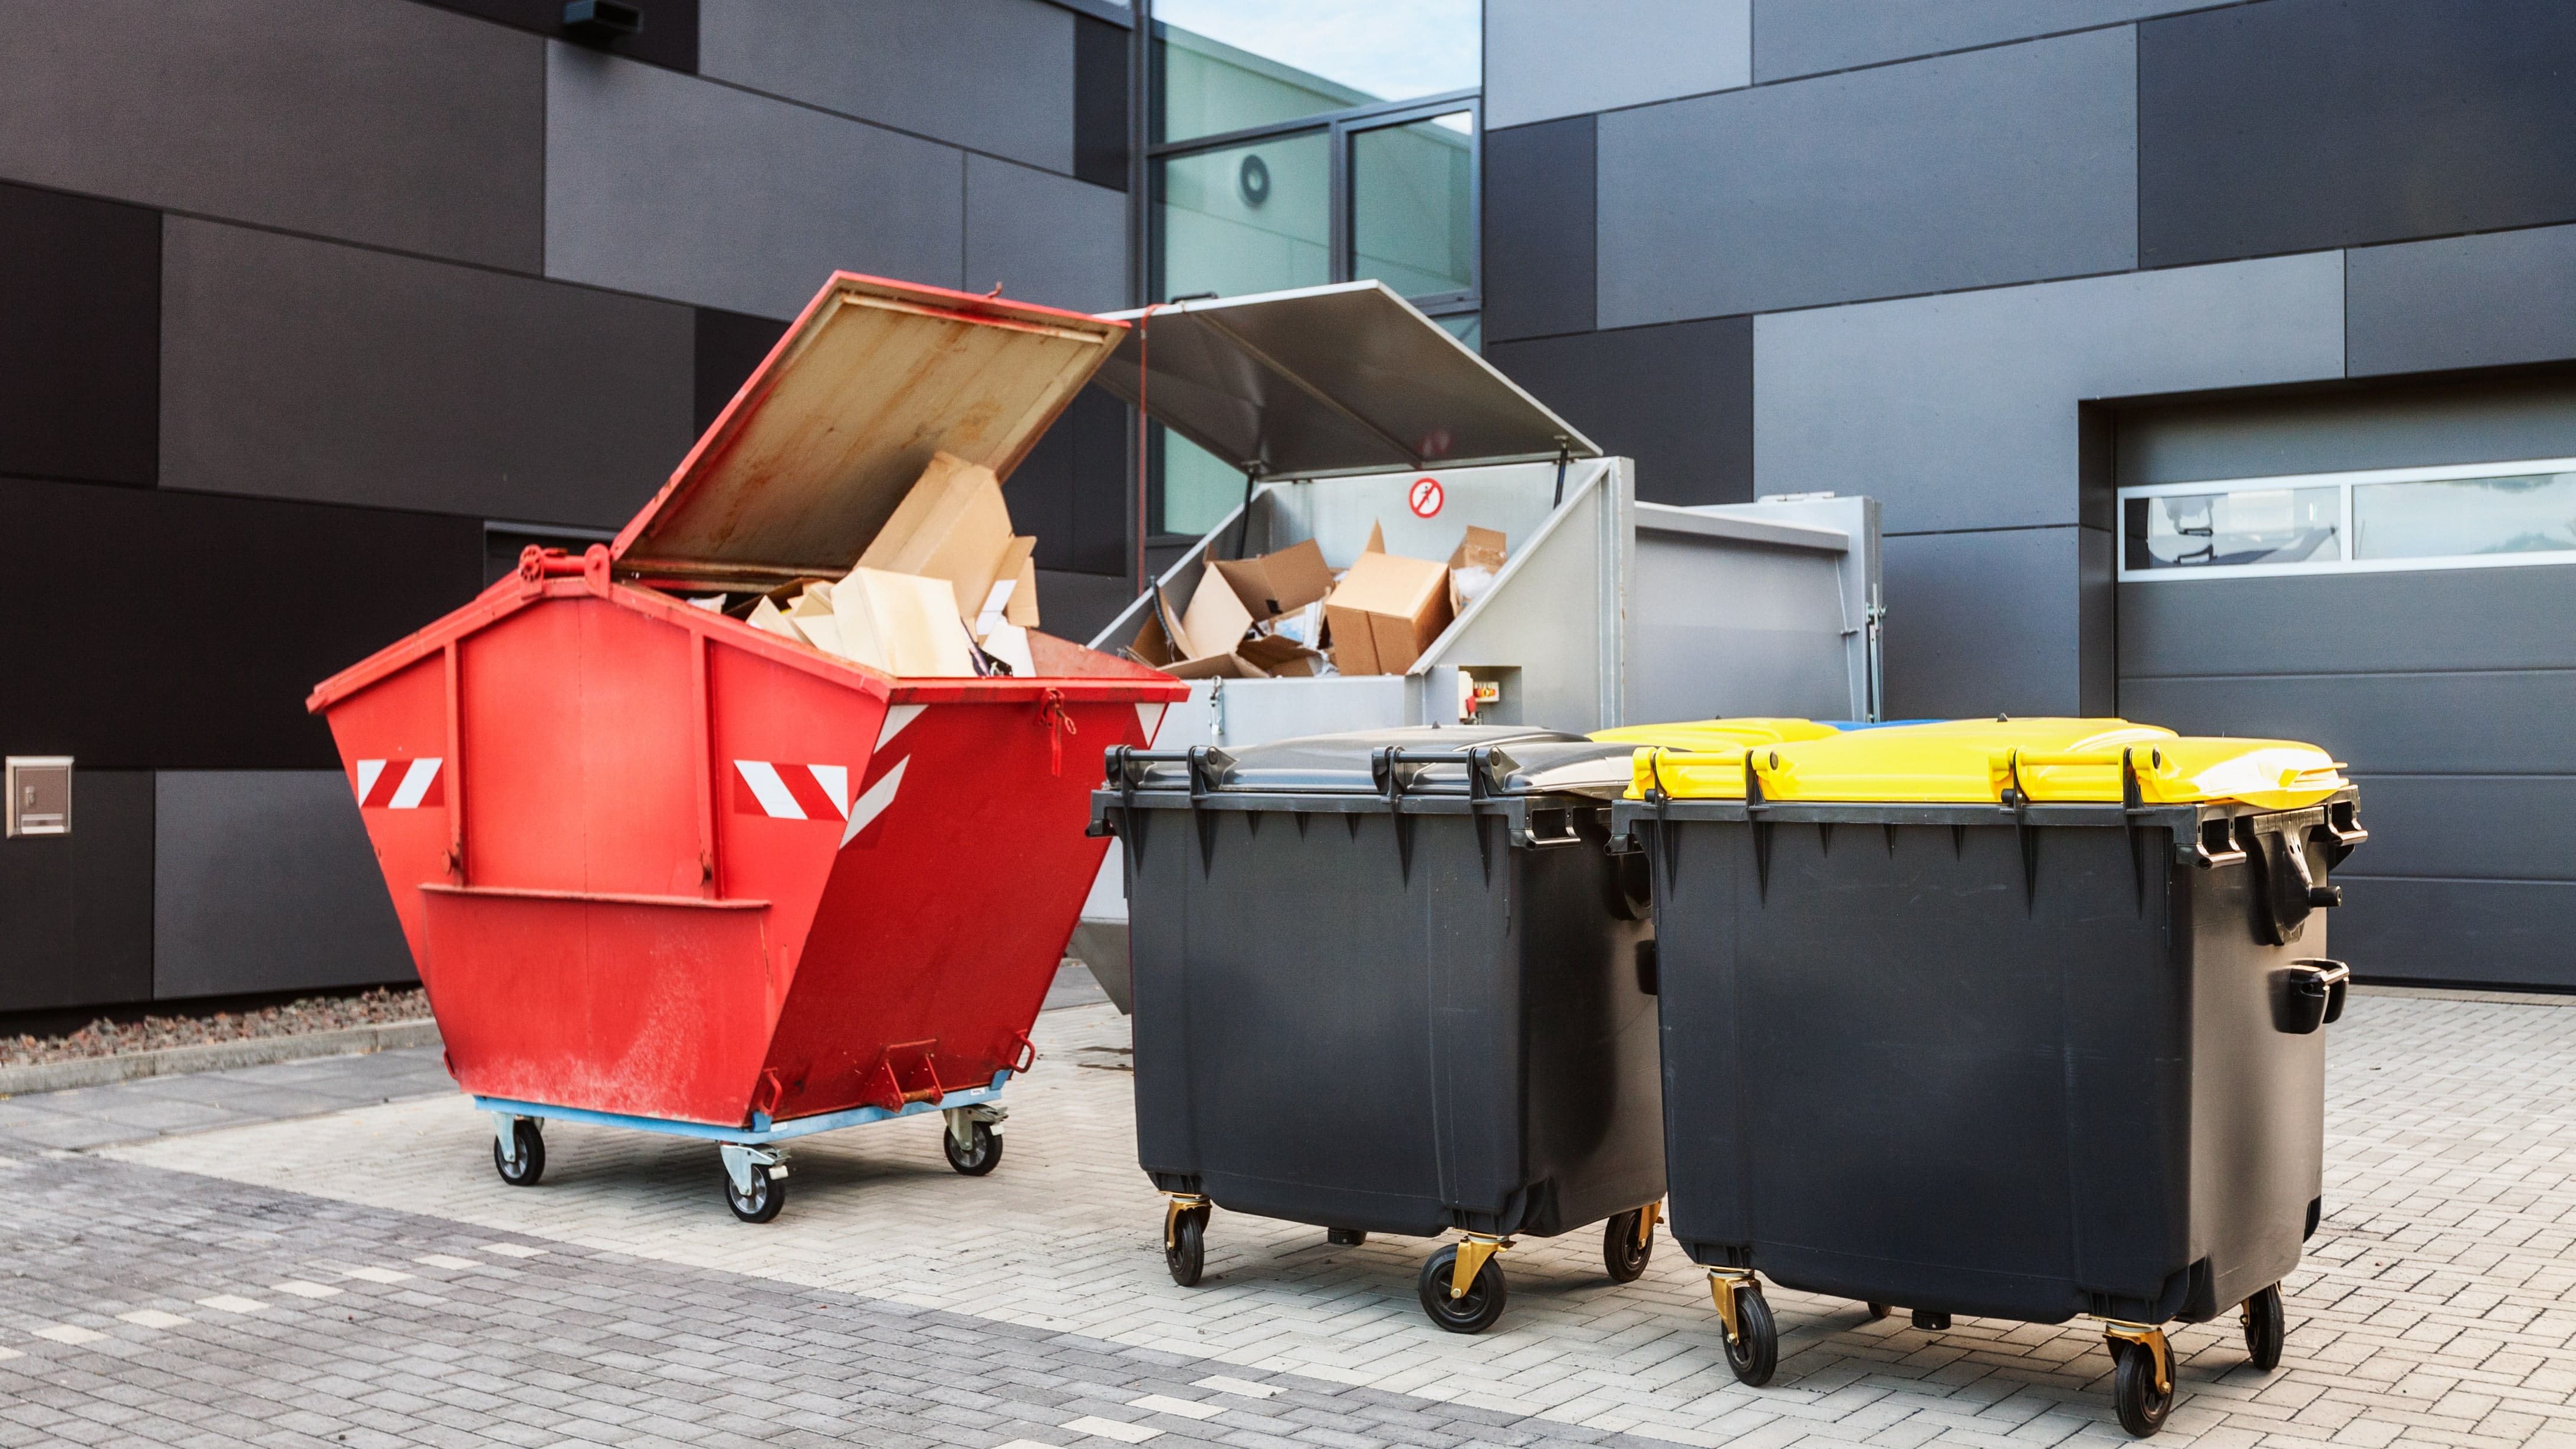 Featured image for “The Major Types of Waste in Business and How to Dispose of Them”